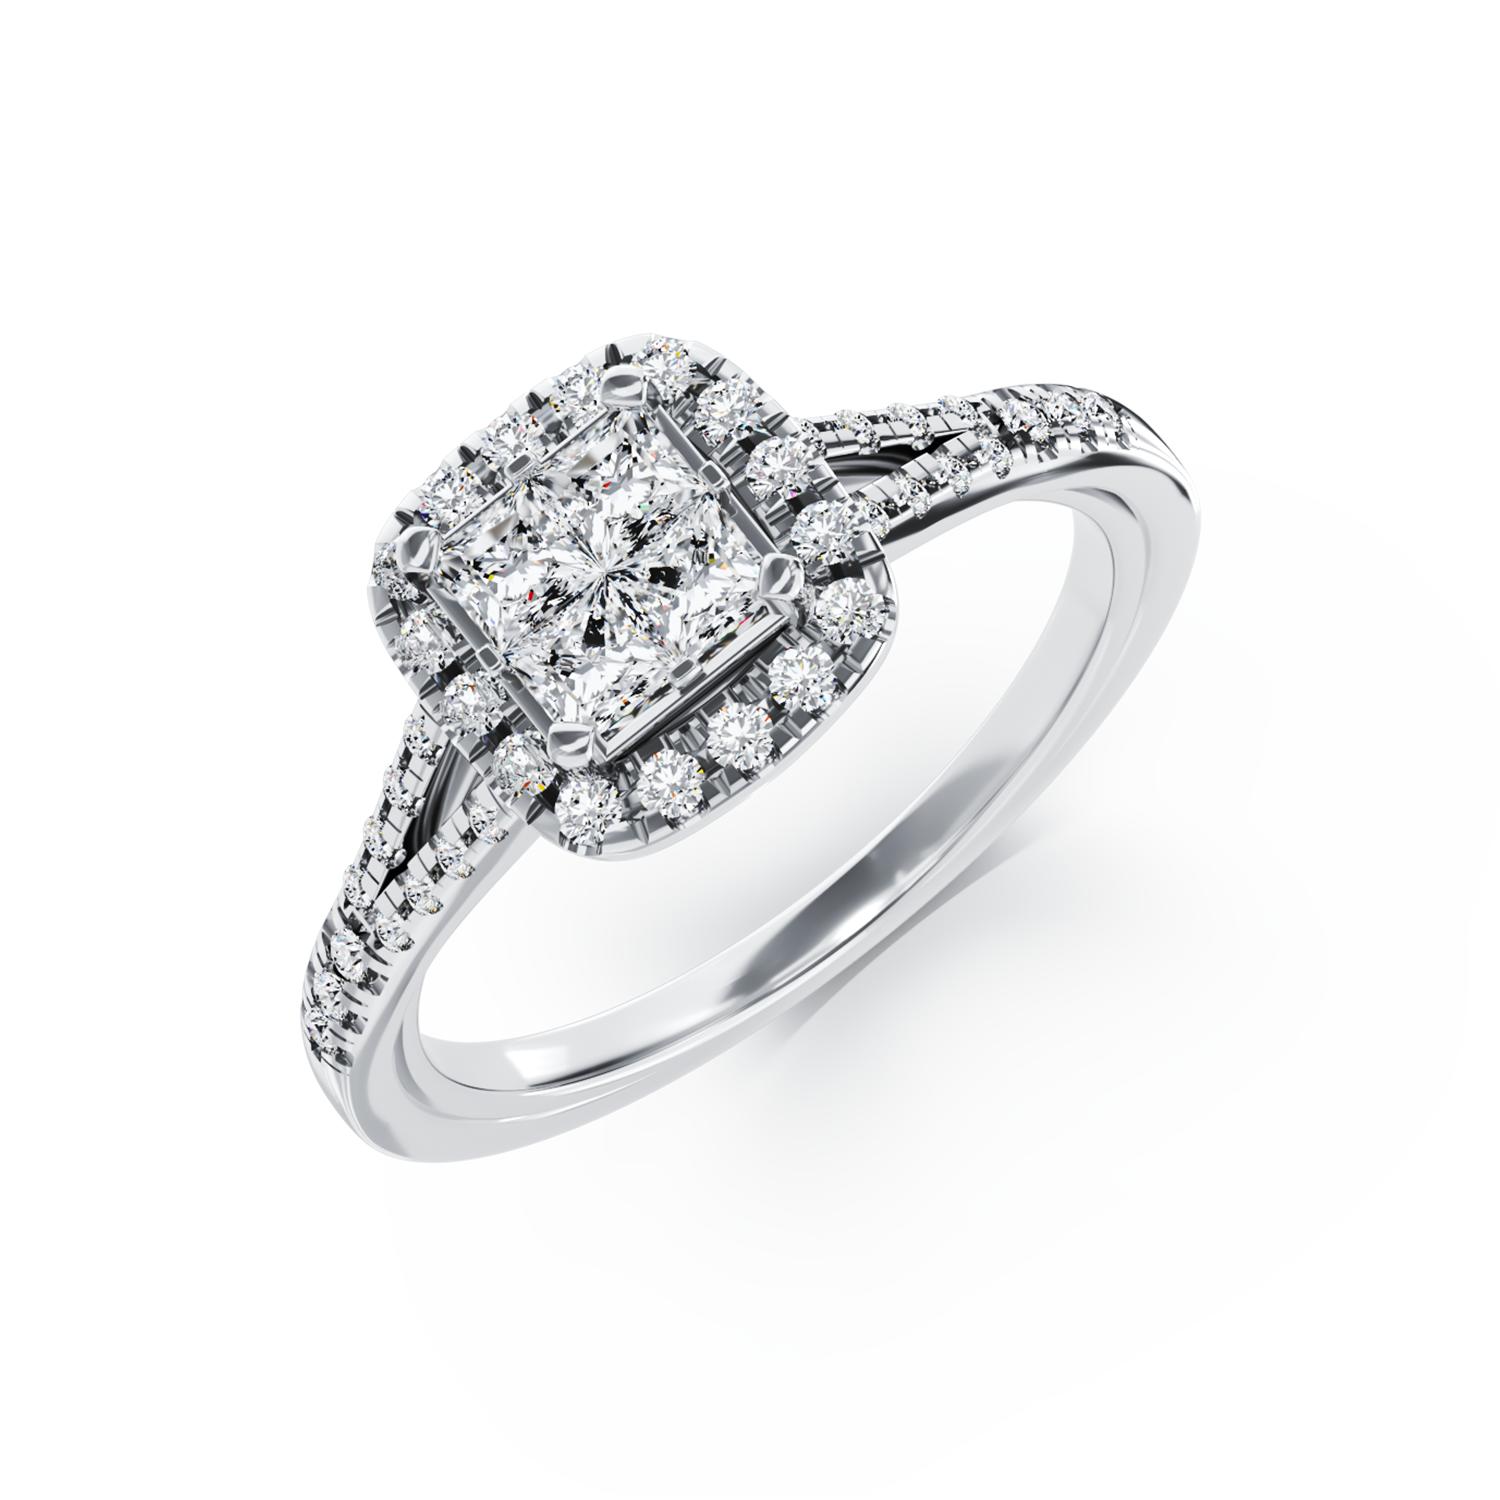 18K white gold engagement ring with 0.53ct diamonds